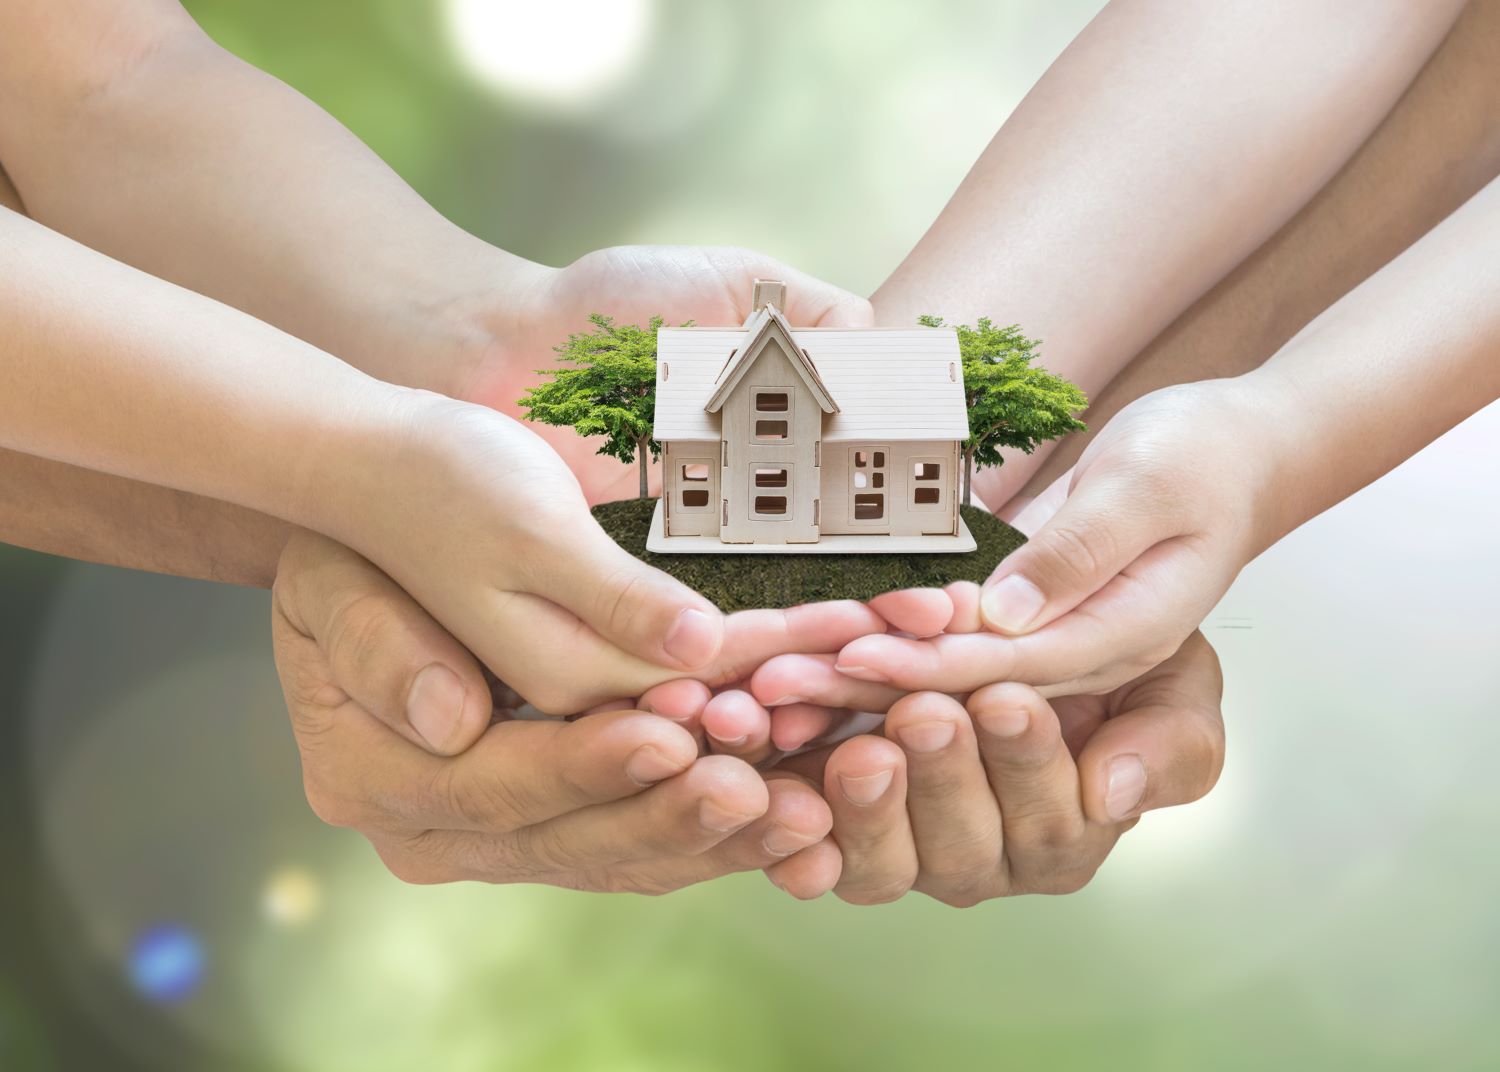 If you are expecting to inherit a large estate you should be prepared to make good financial decisions. Here are some tips for managing a large inheritance.